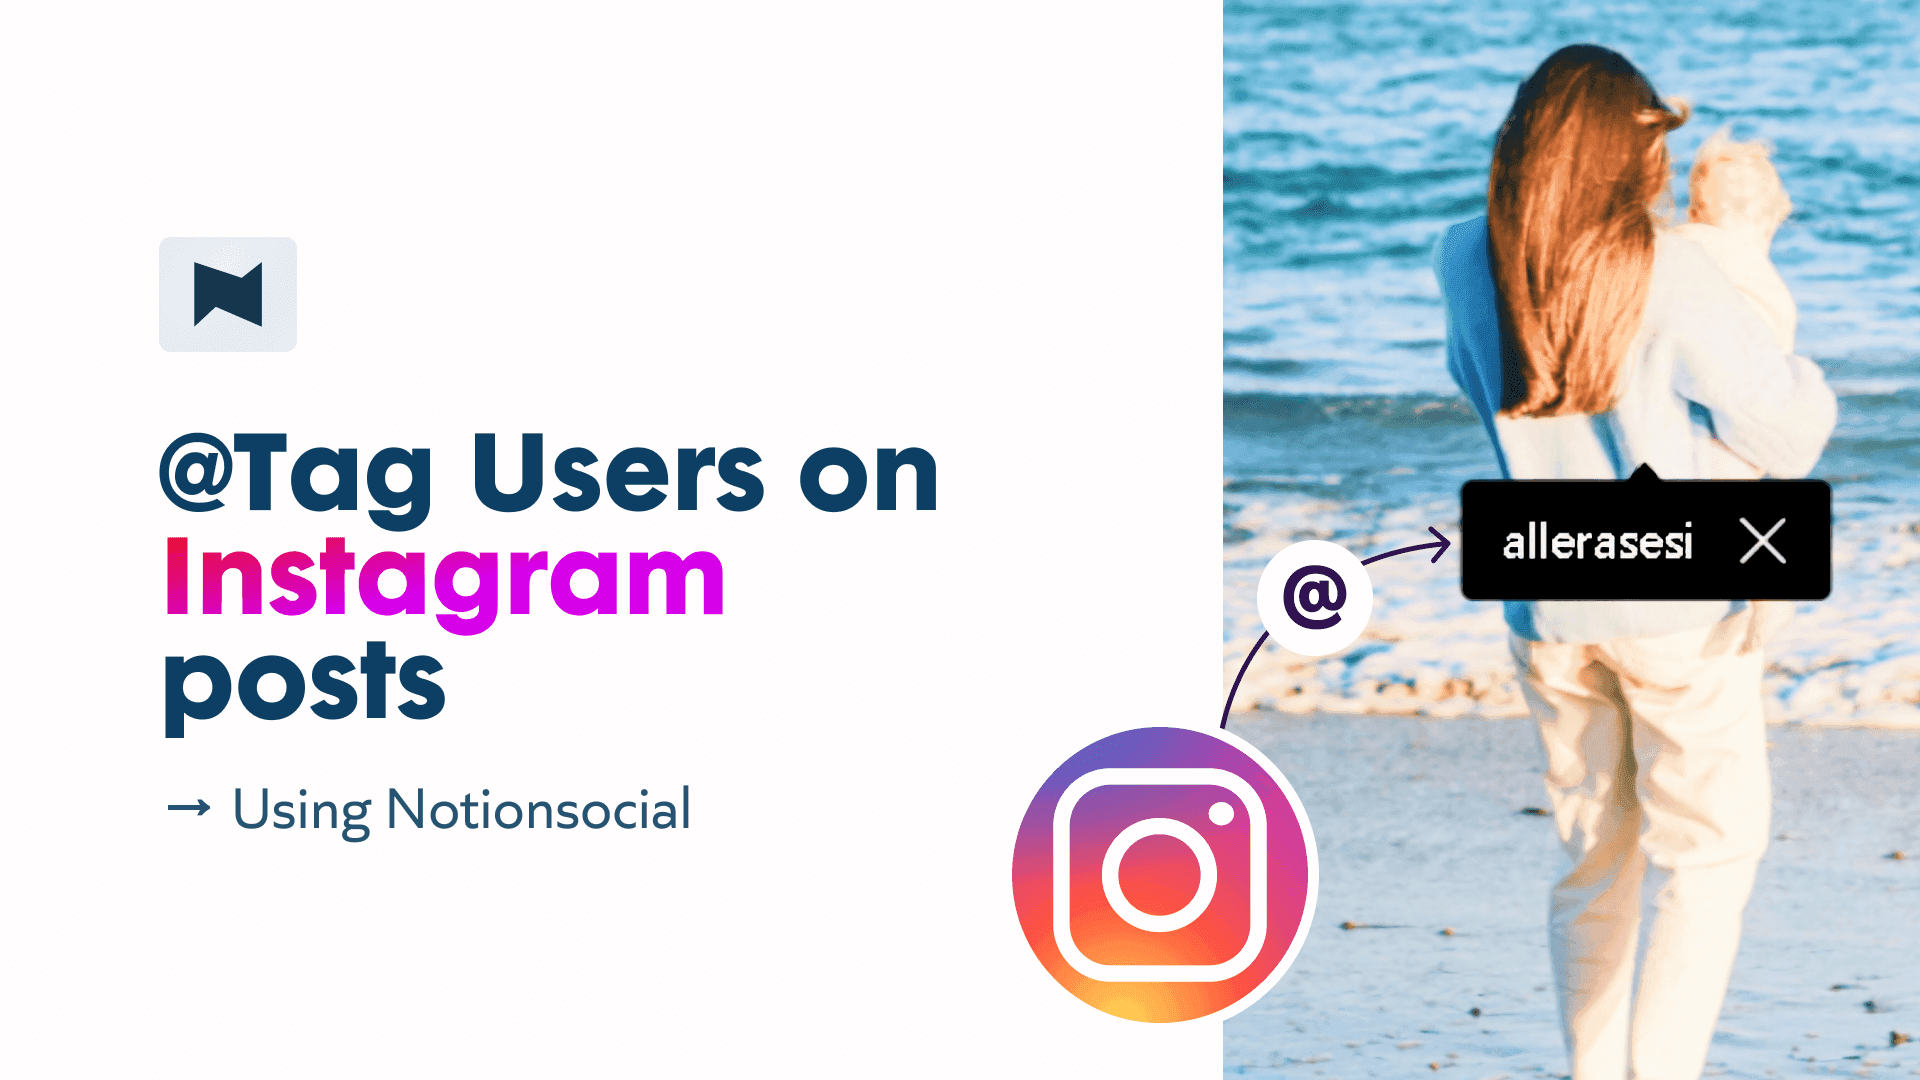 How to Tag Users on Instagram posts